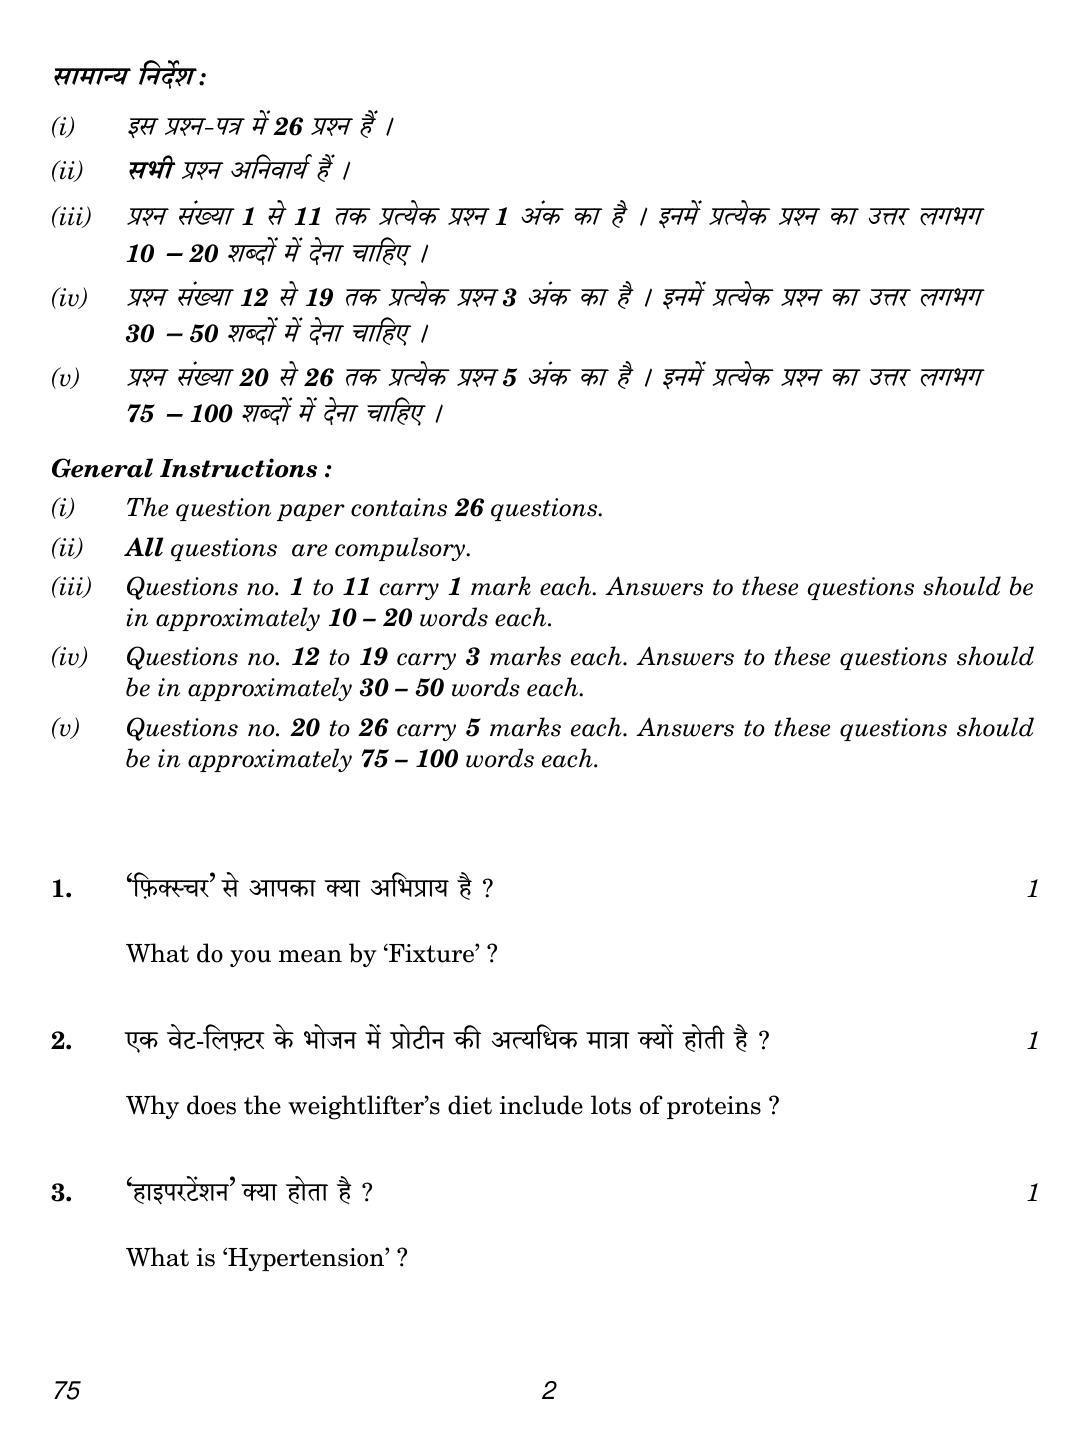 CBSE Class 12 75 Physical Education 2018 Question Paper - Page 2